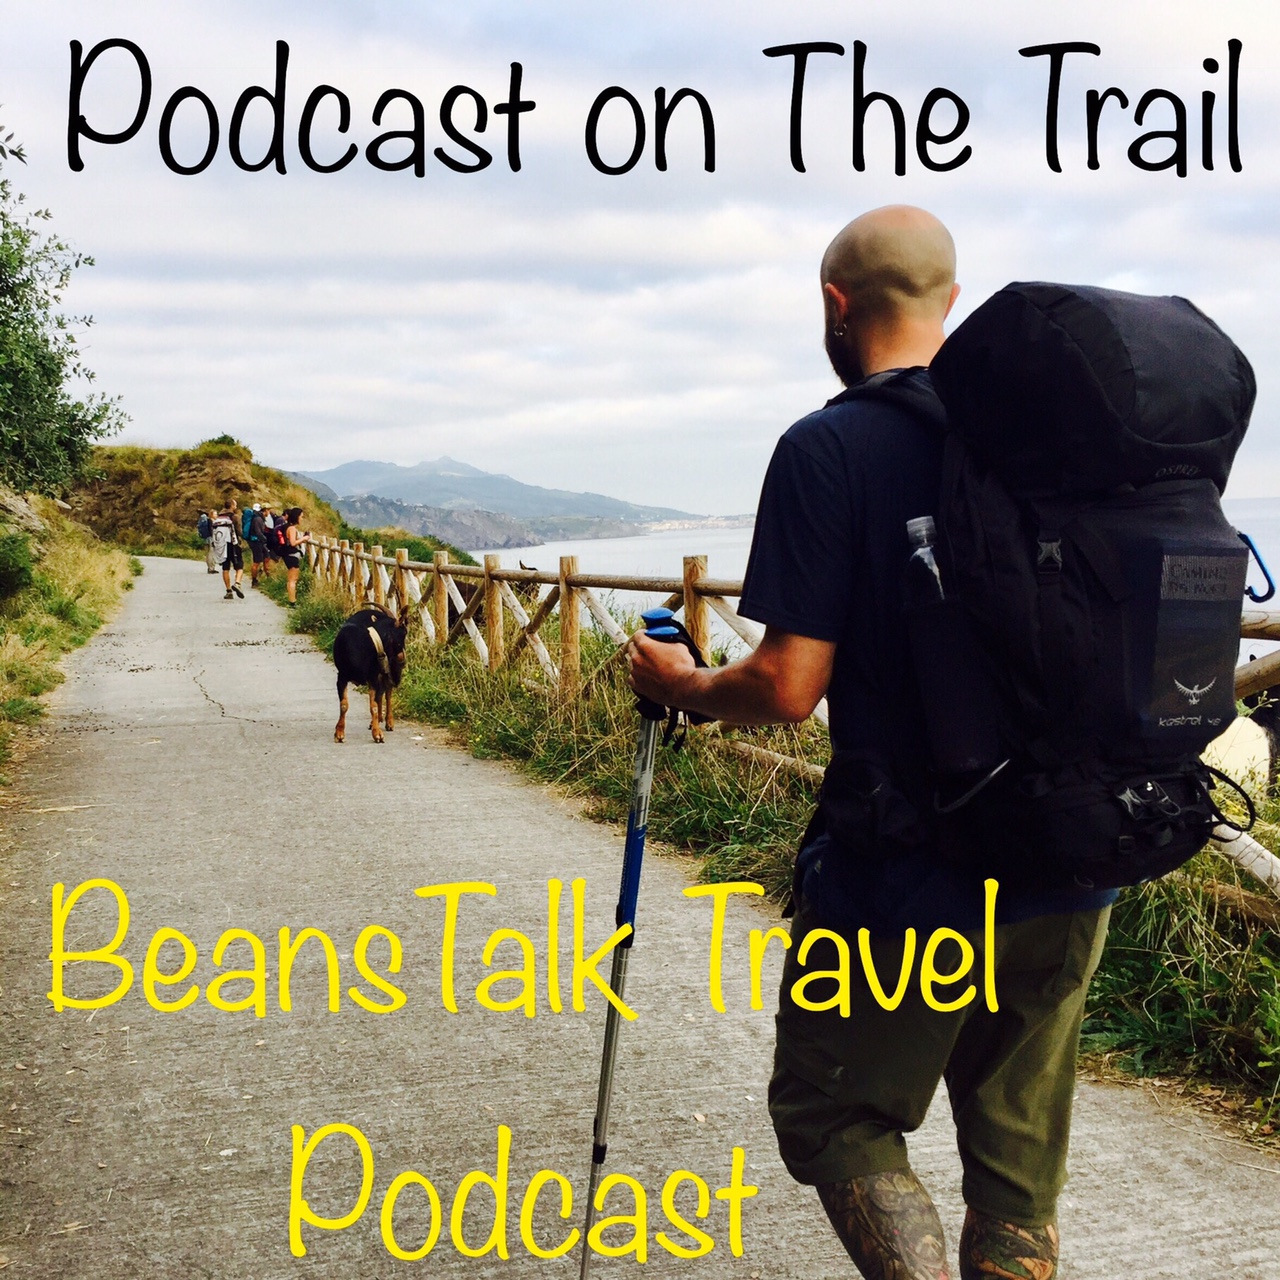 Episode #24 - Exhausted on the trail